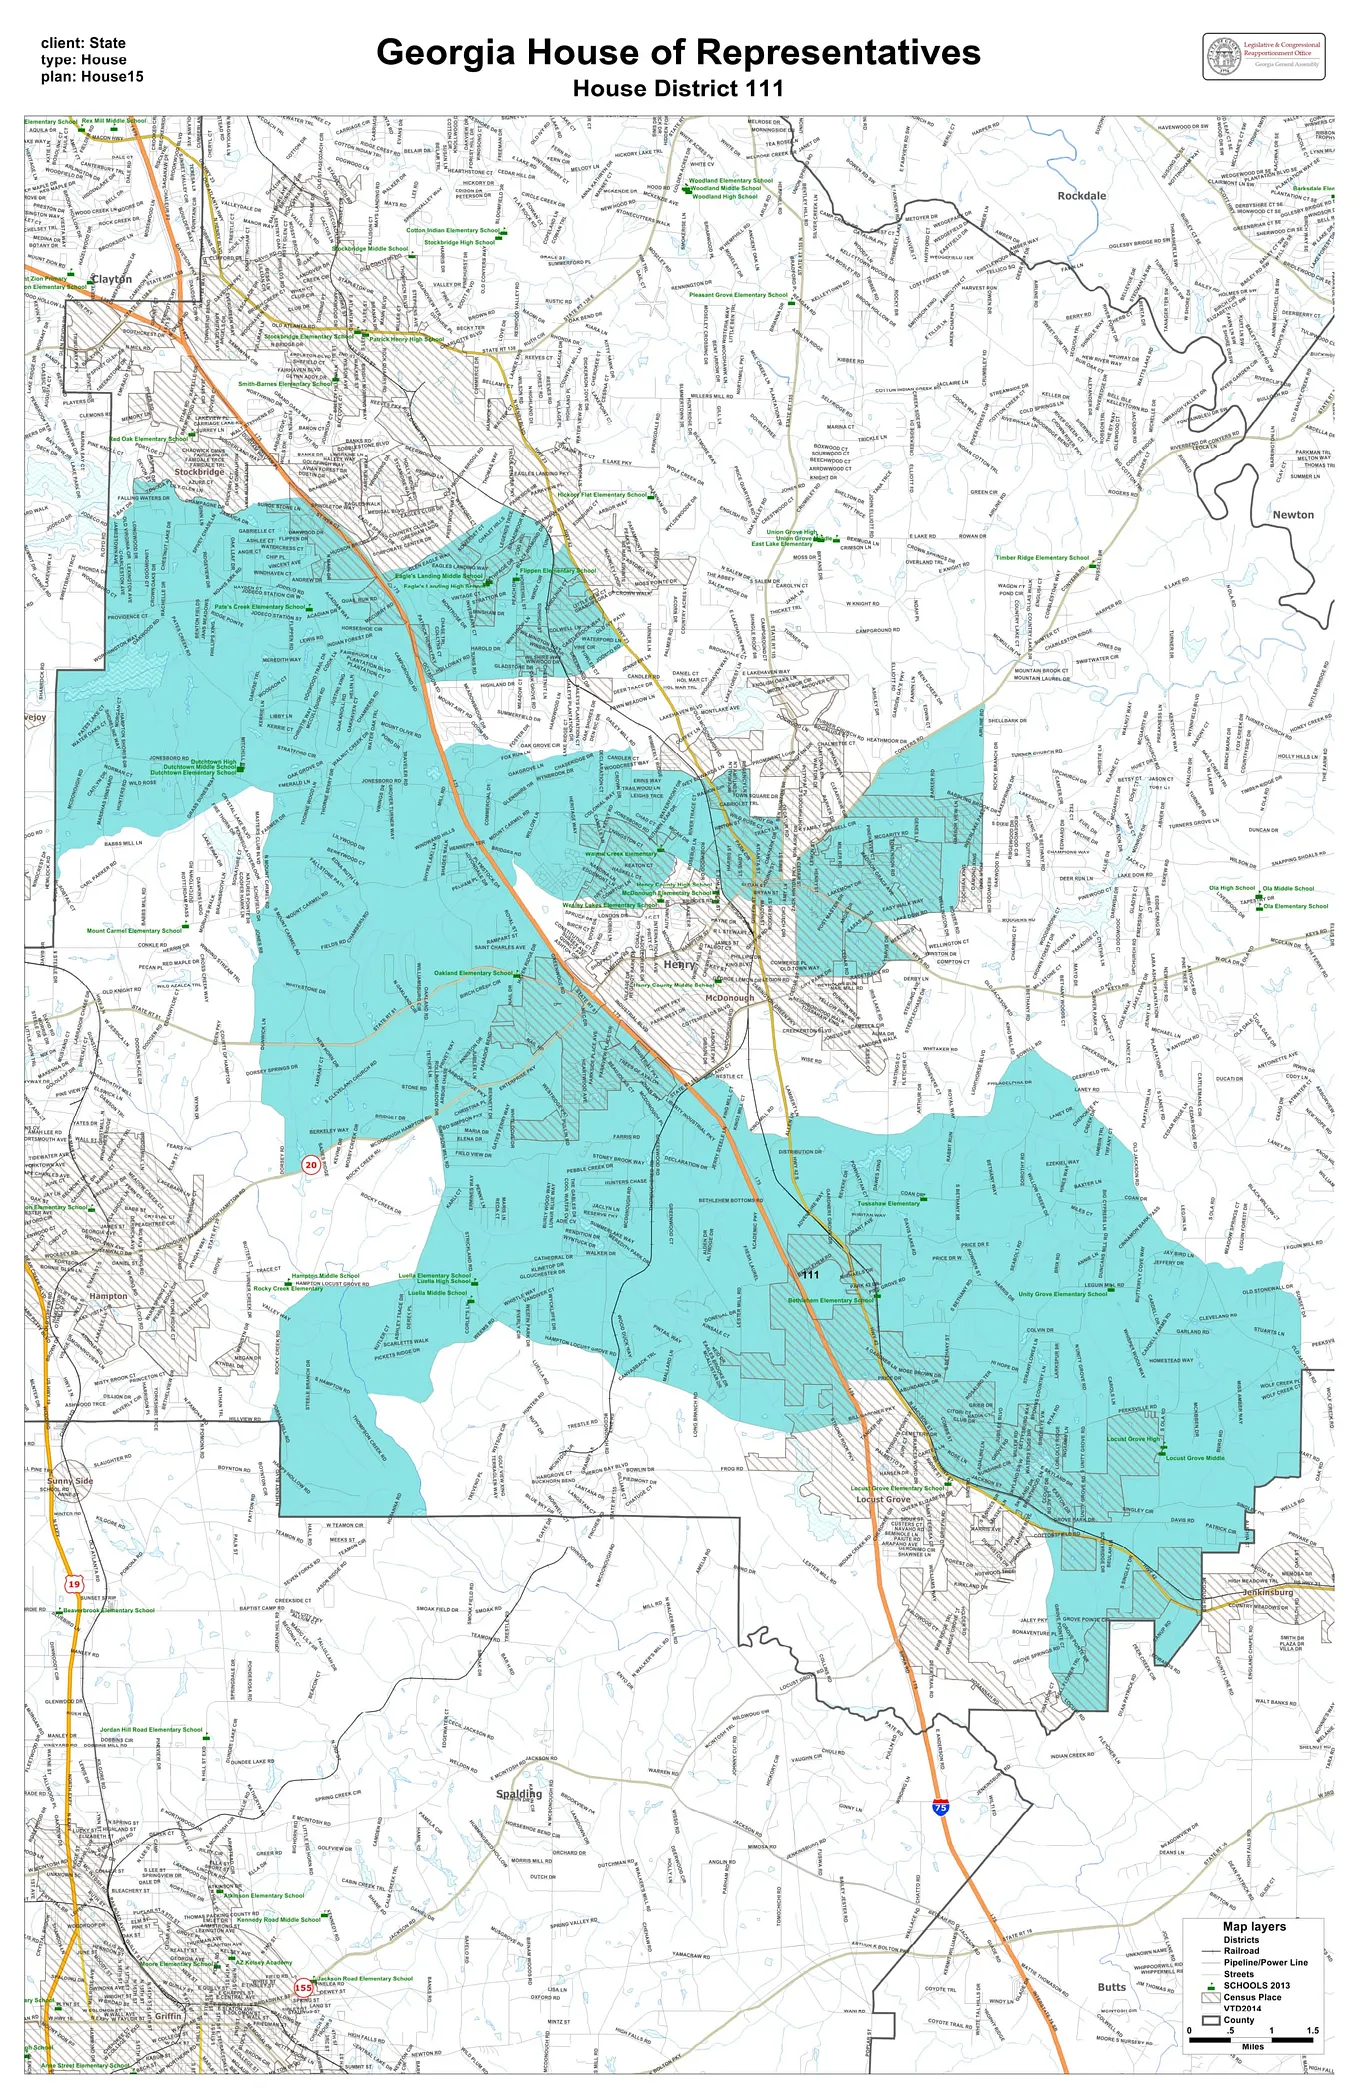 Georgia’s Competitive Districts: HD-111